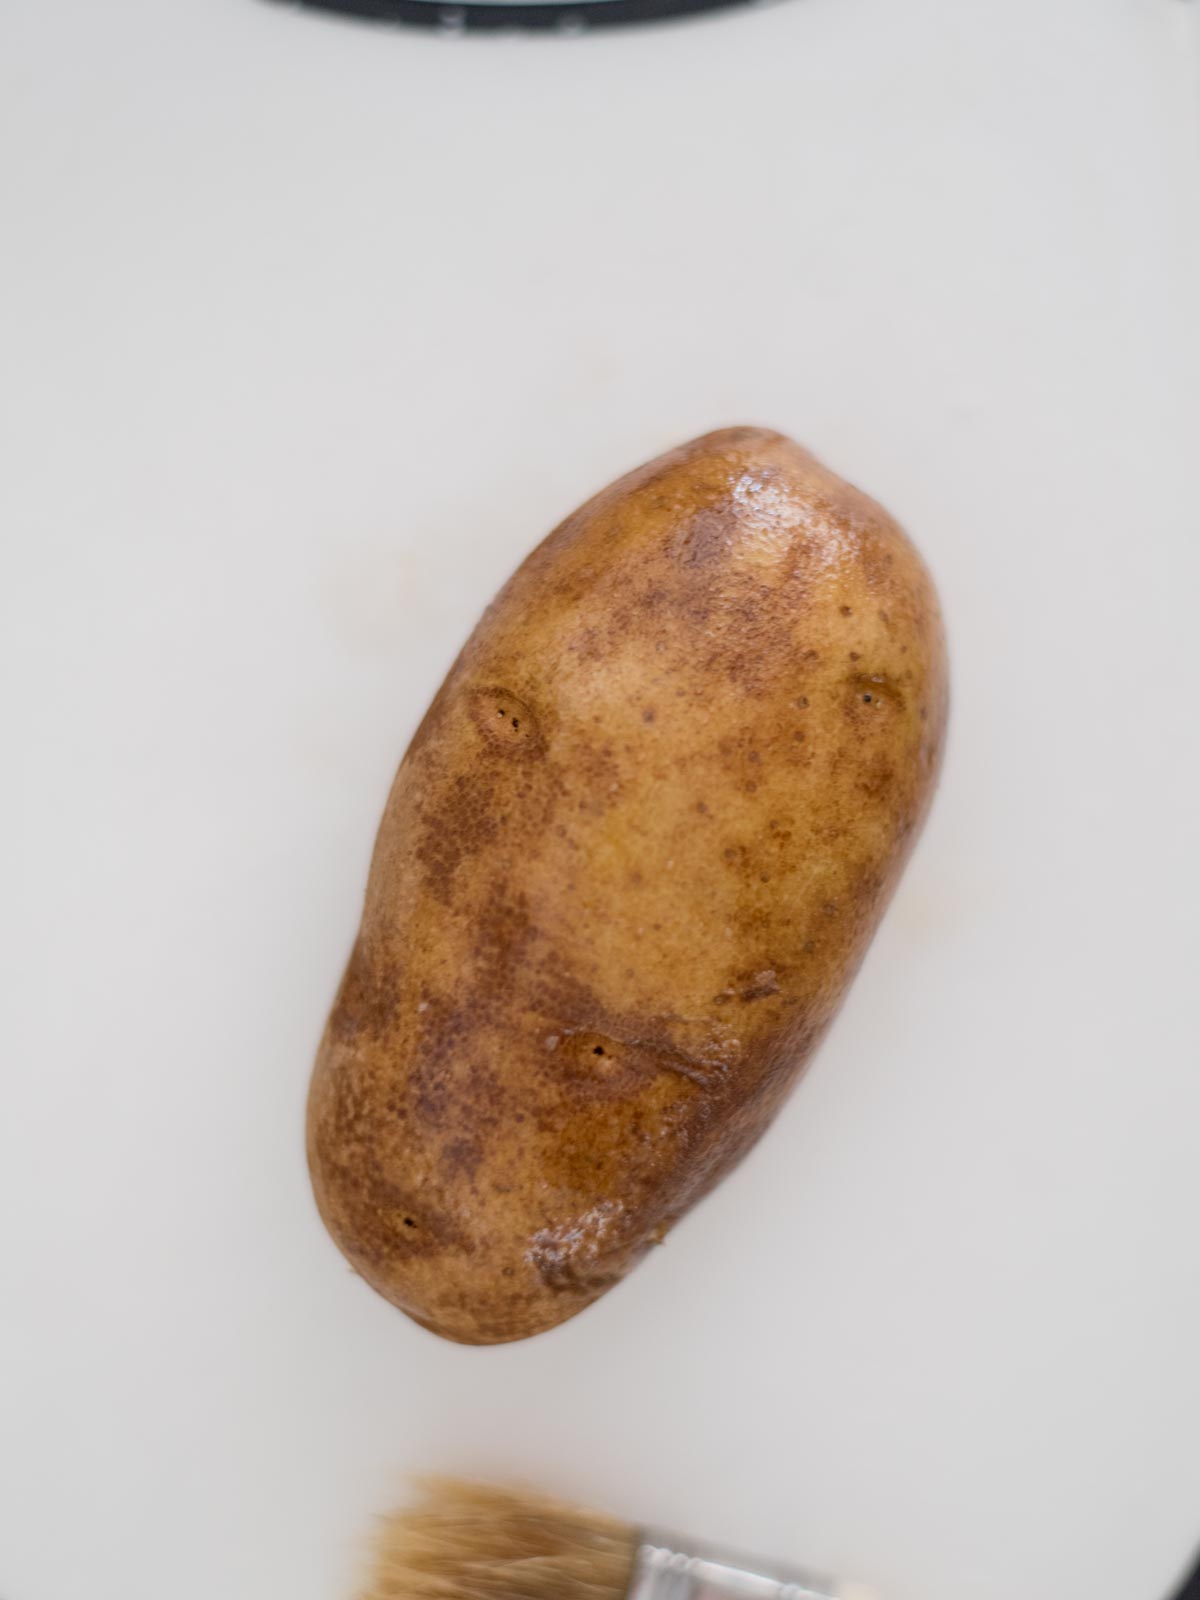 A washed whole potato poked with the tines of a fork.